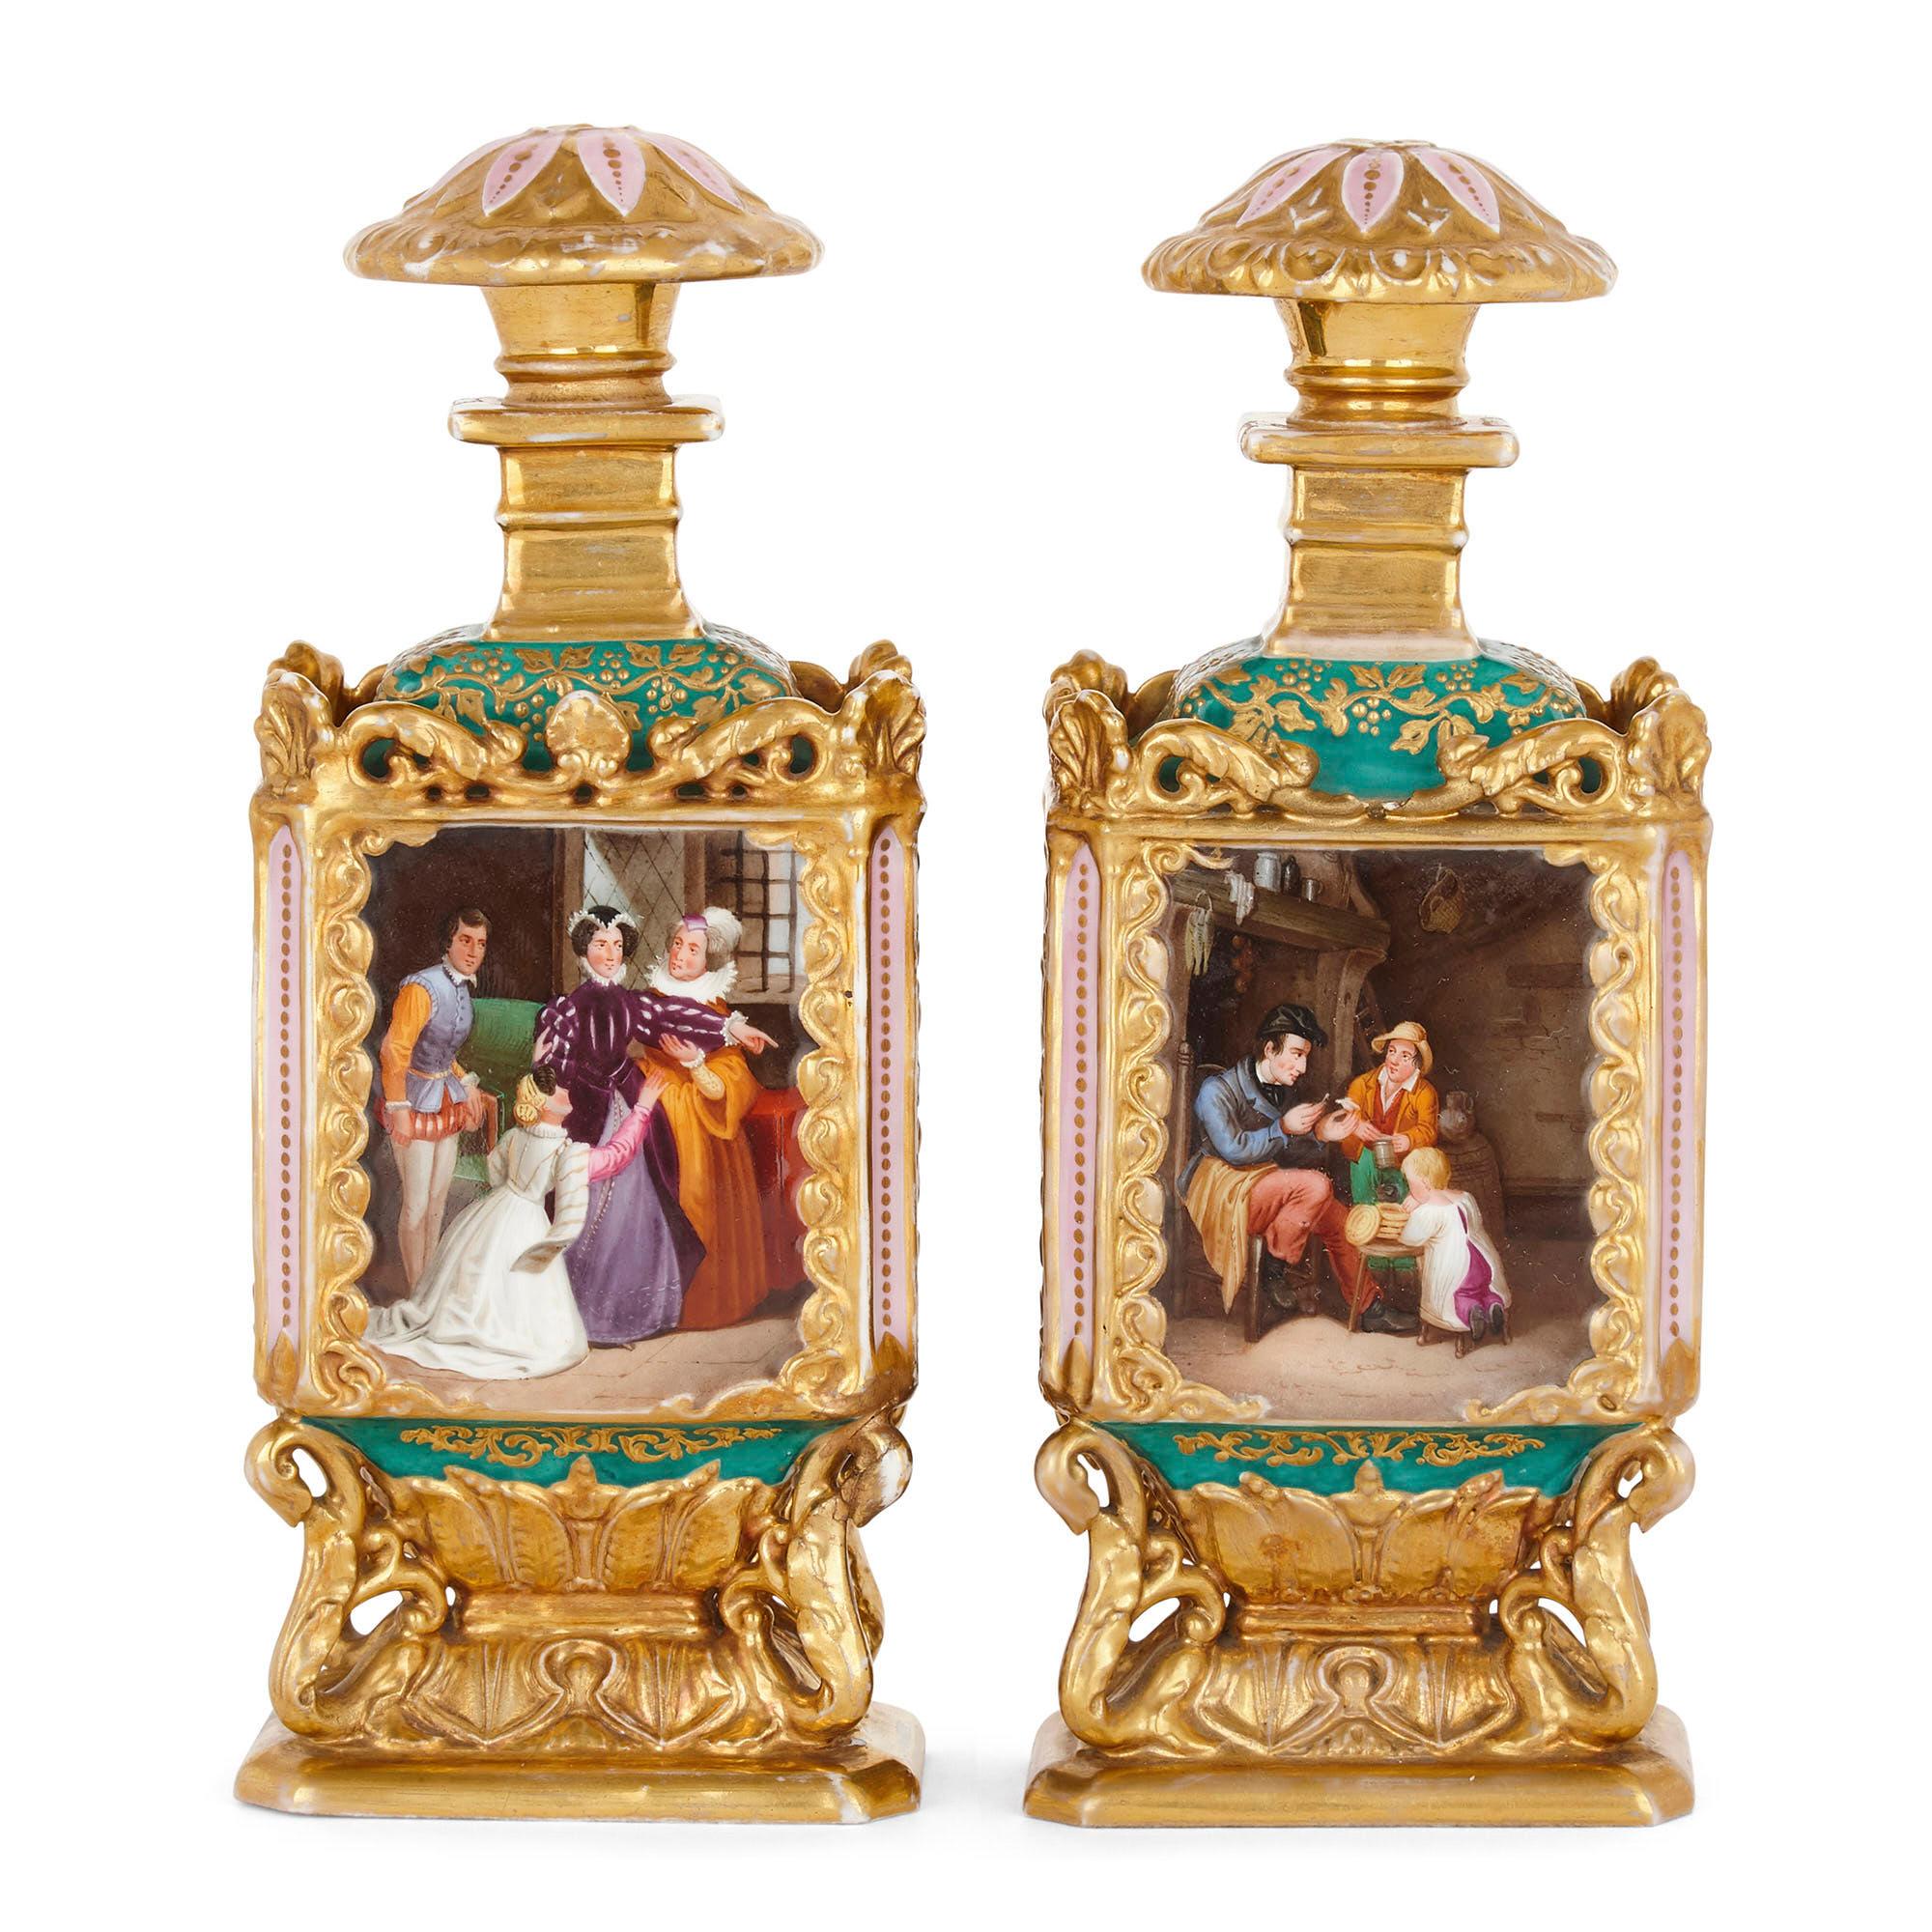 Pair of Rococo style gilt porcelain bottles probably by Jacob Petit
French, 19th century
Measures: Height 22.5cm, width 9cm, depth 6cm

This pair of bottles, attributed to Jacob Petit, is crafted from fine porcelain. Each square-shaped bottle is